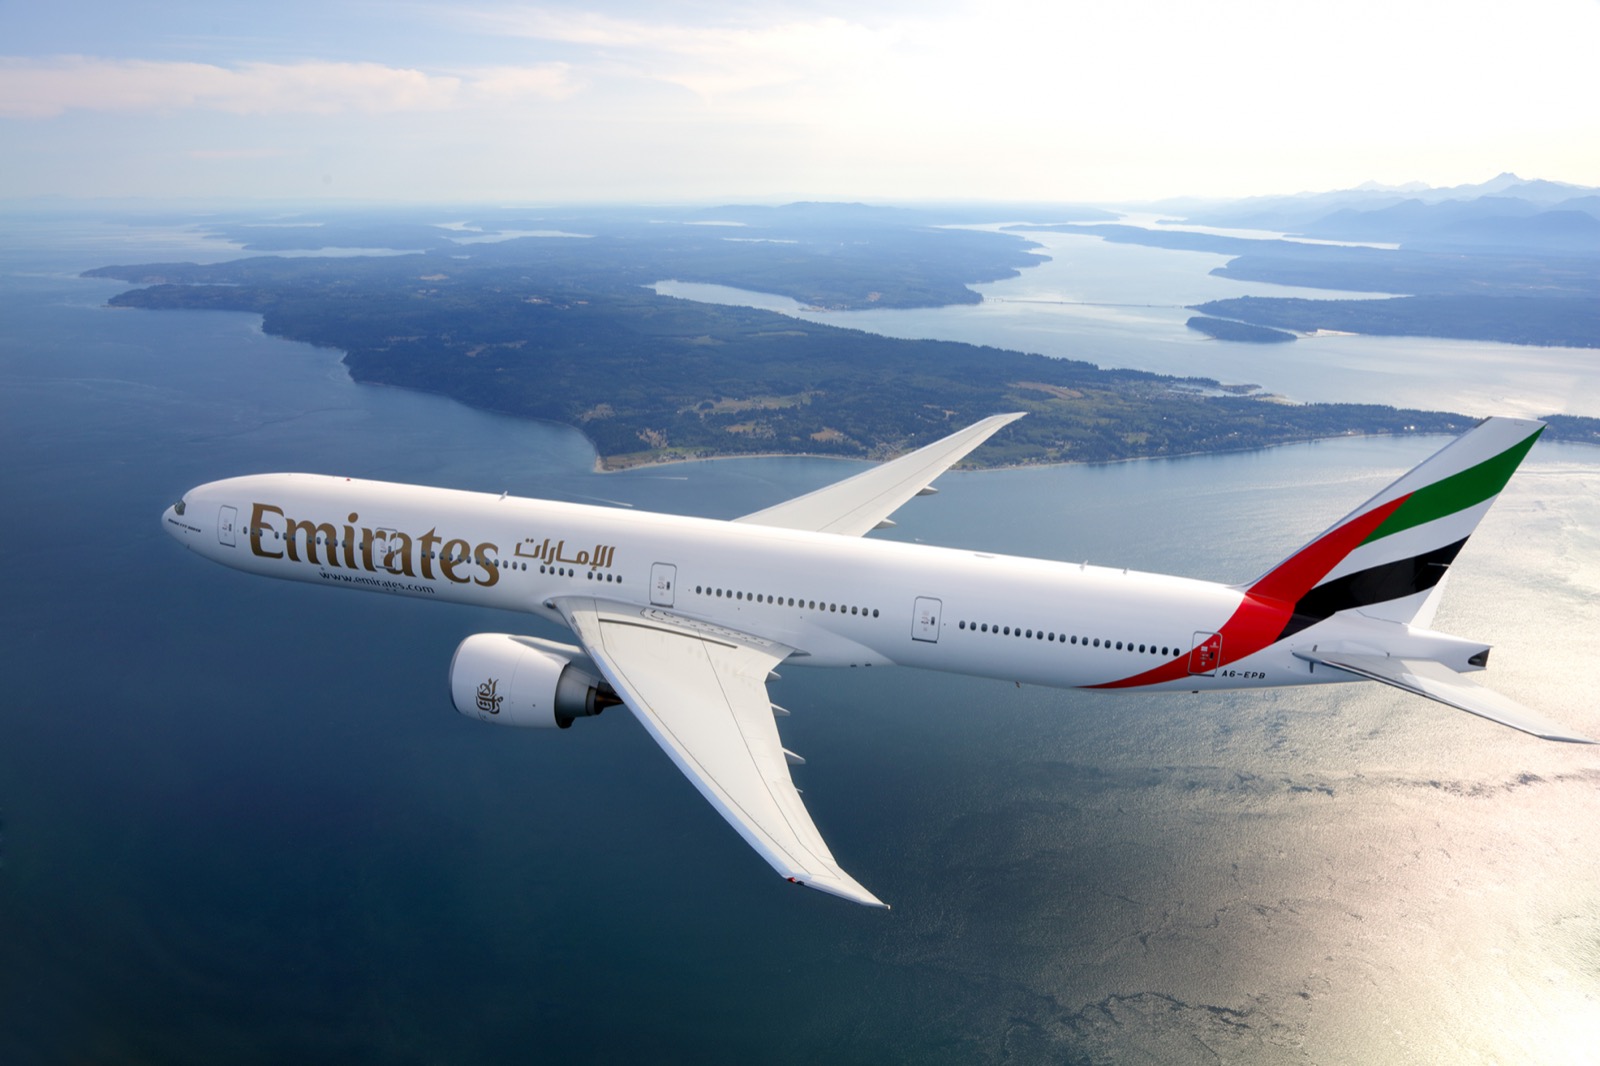 The Emirates flight will act as a reference for potential demonstrations in the near future where 100 percent sustainable aviation fuel is approved.